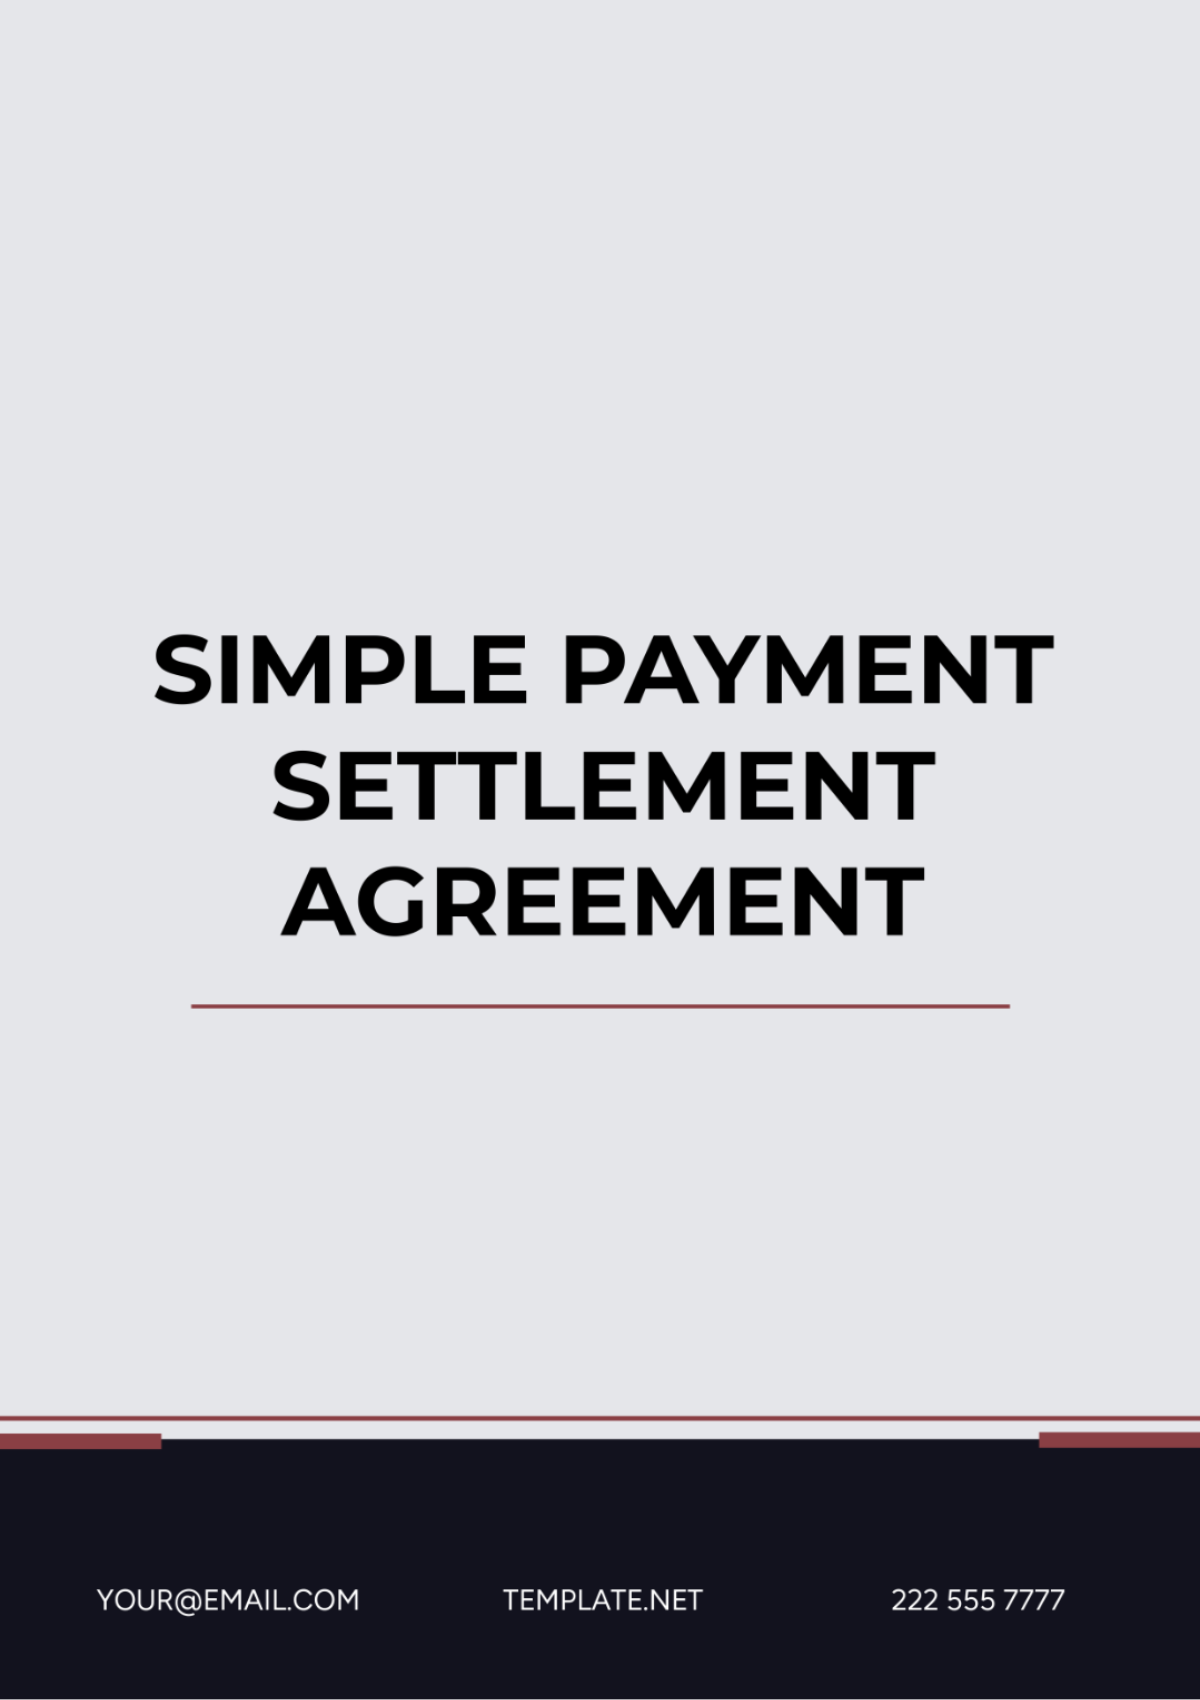 Free Simple Payment Settlement Agreement Template